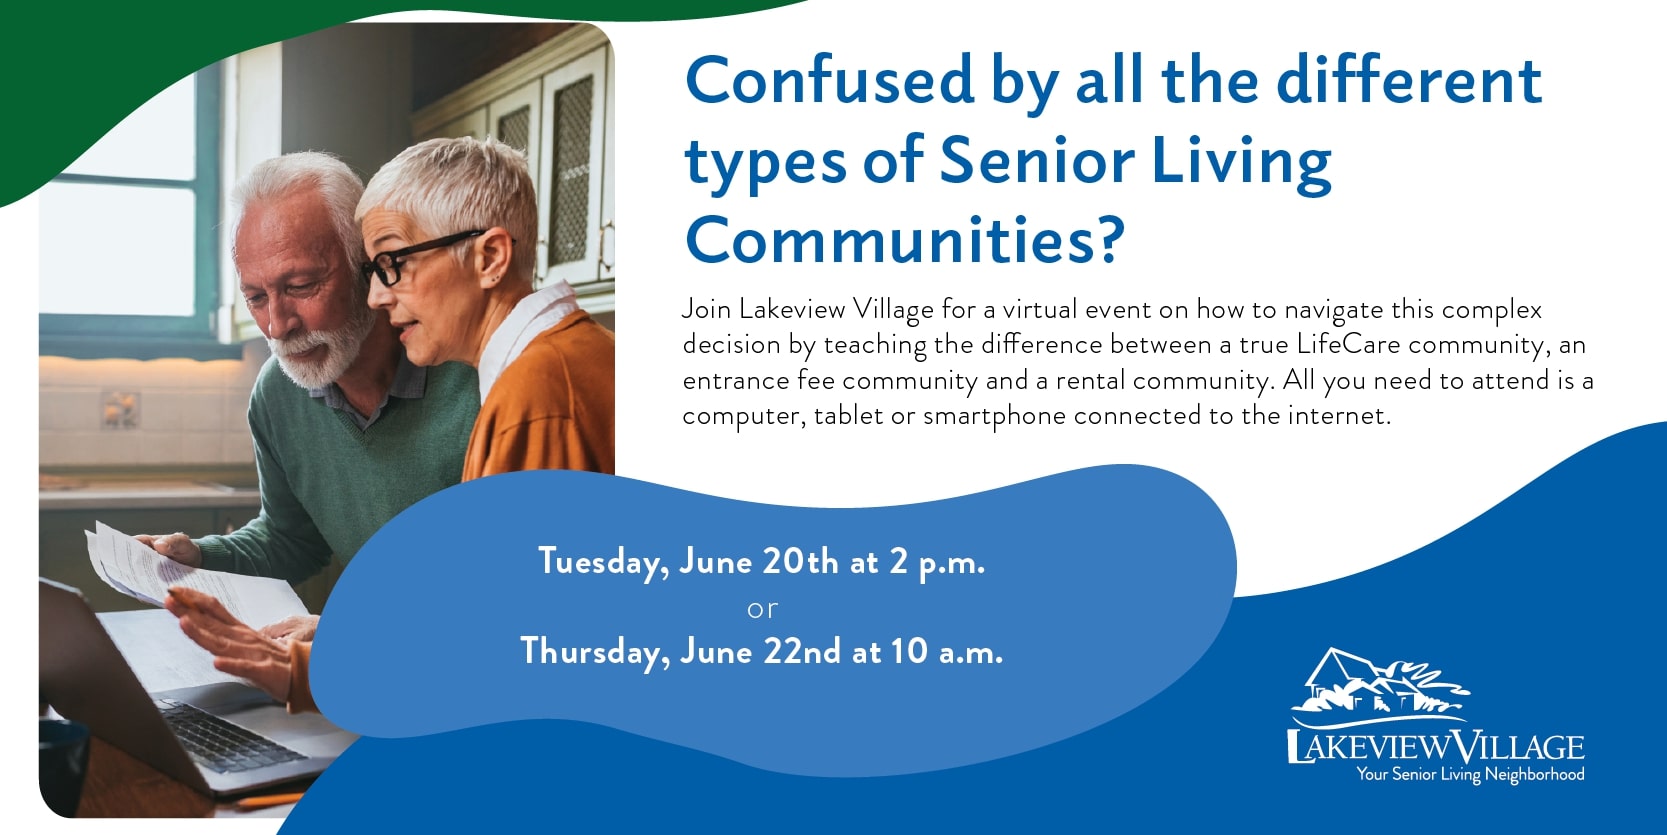 Confused by all the different types of Senior Living Communities?